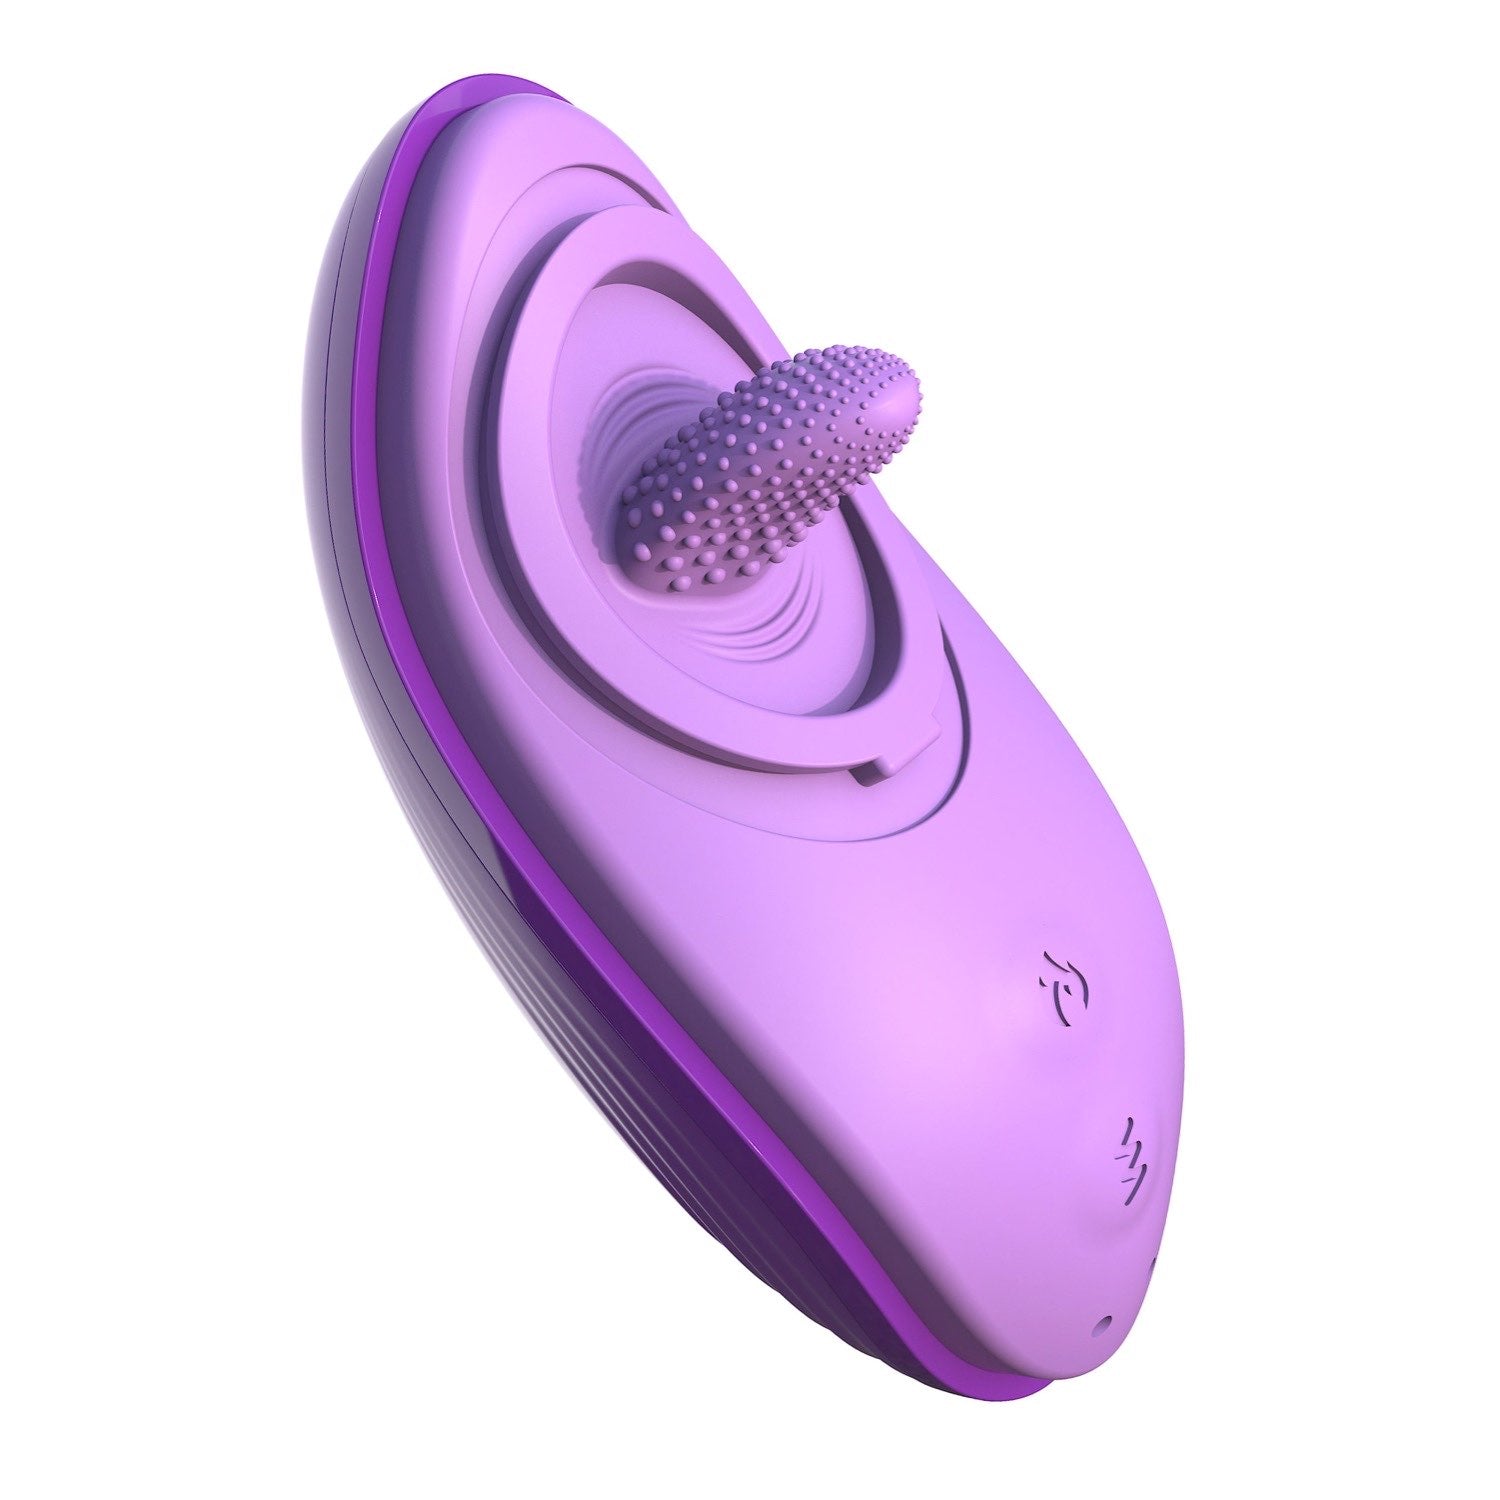 Fantasy For Her Silicone Fun Tongue - Purple USB Rechargeable Flicking Stimulator by Pipedream